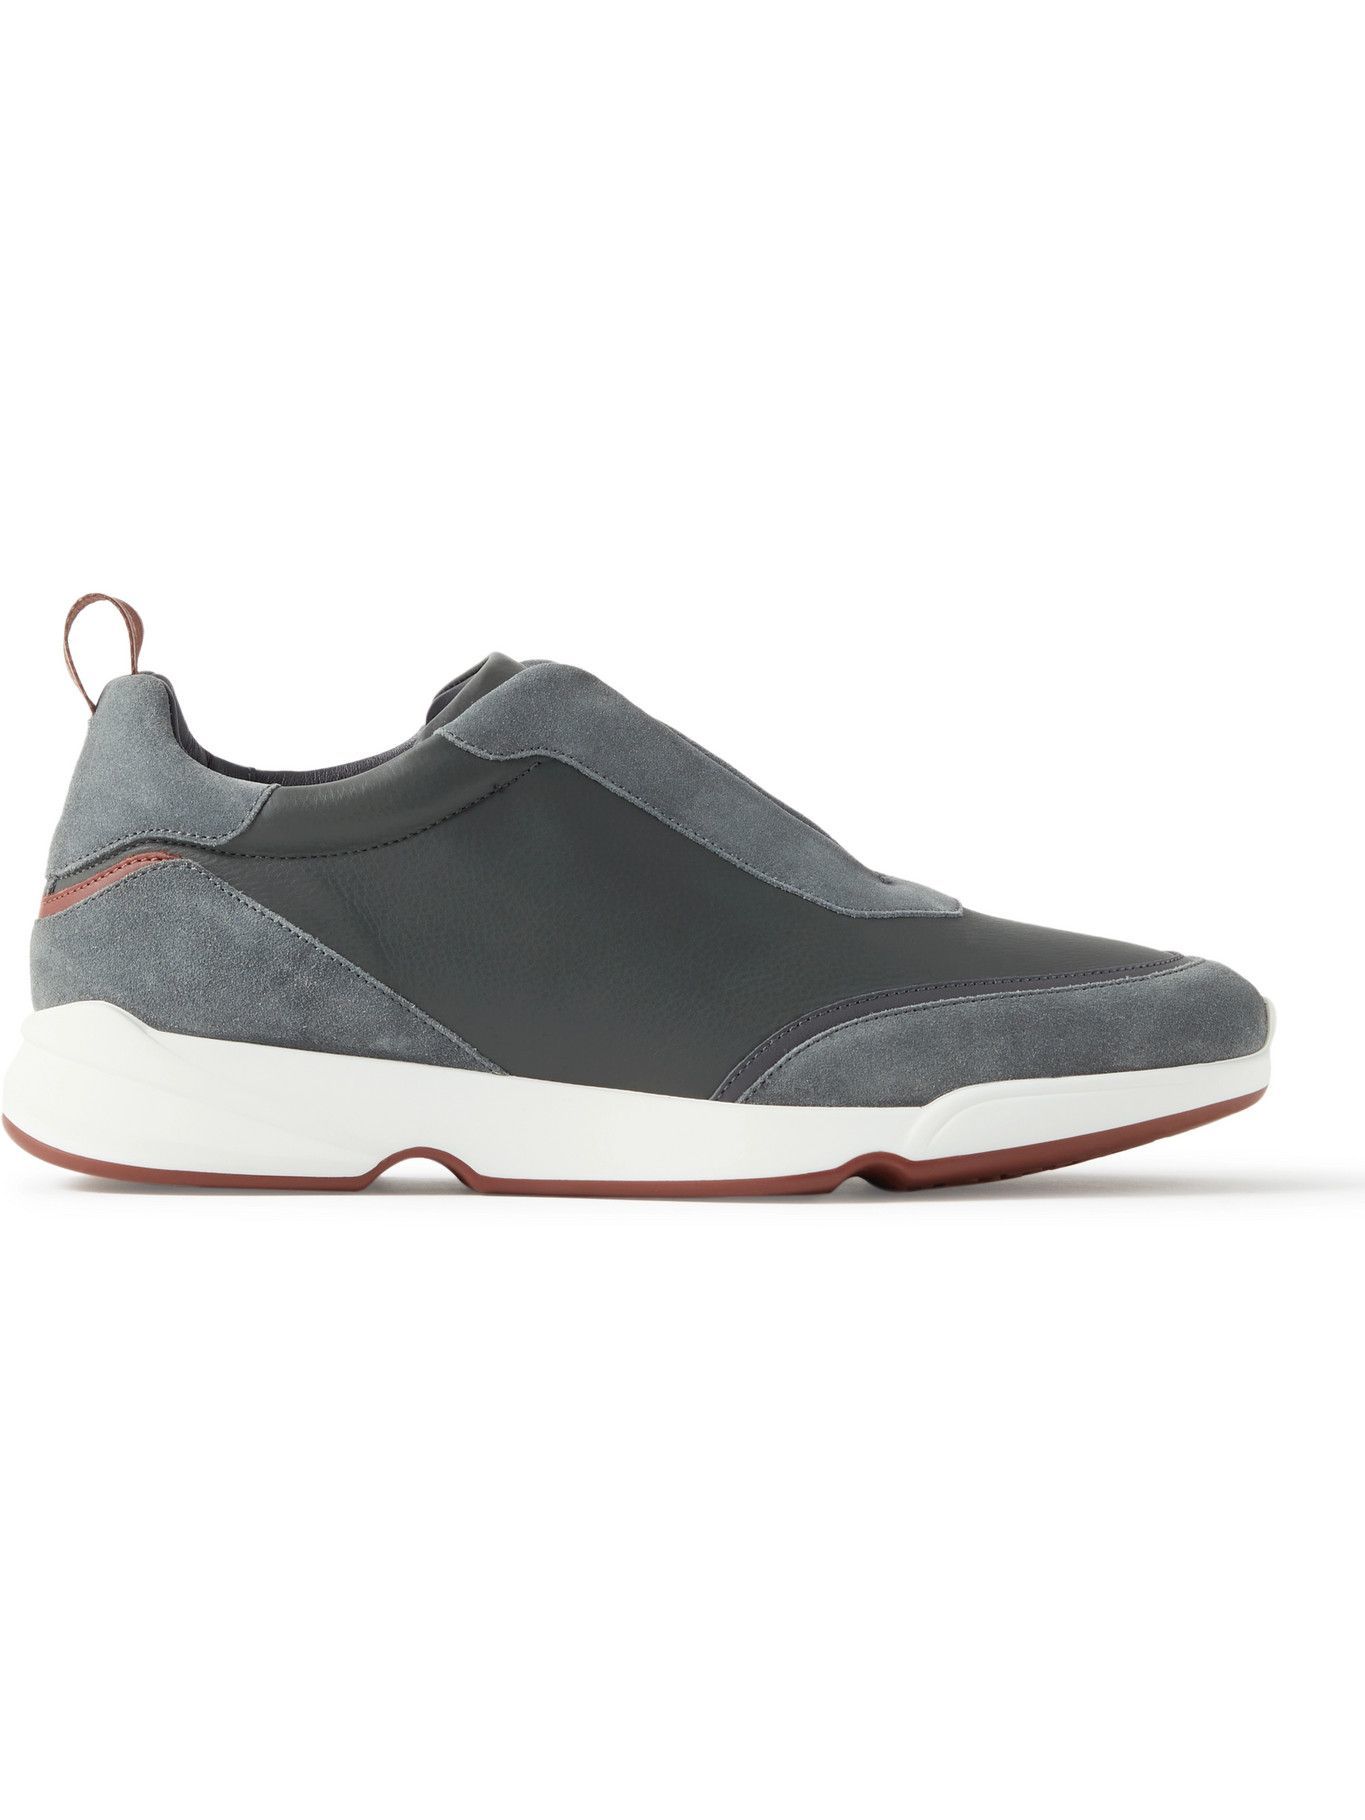 Loro Piana - Modular Walk Leather-Trimmed Canvas and Suede Sneakers ...